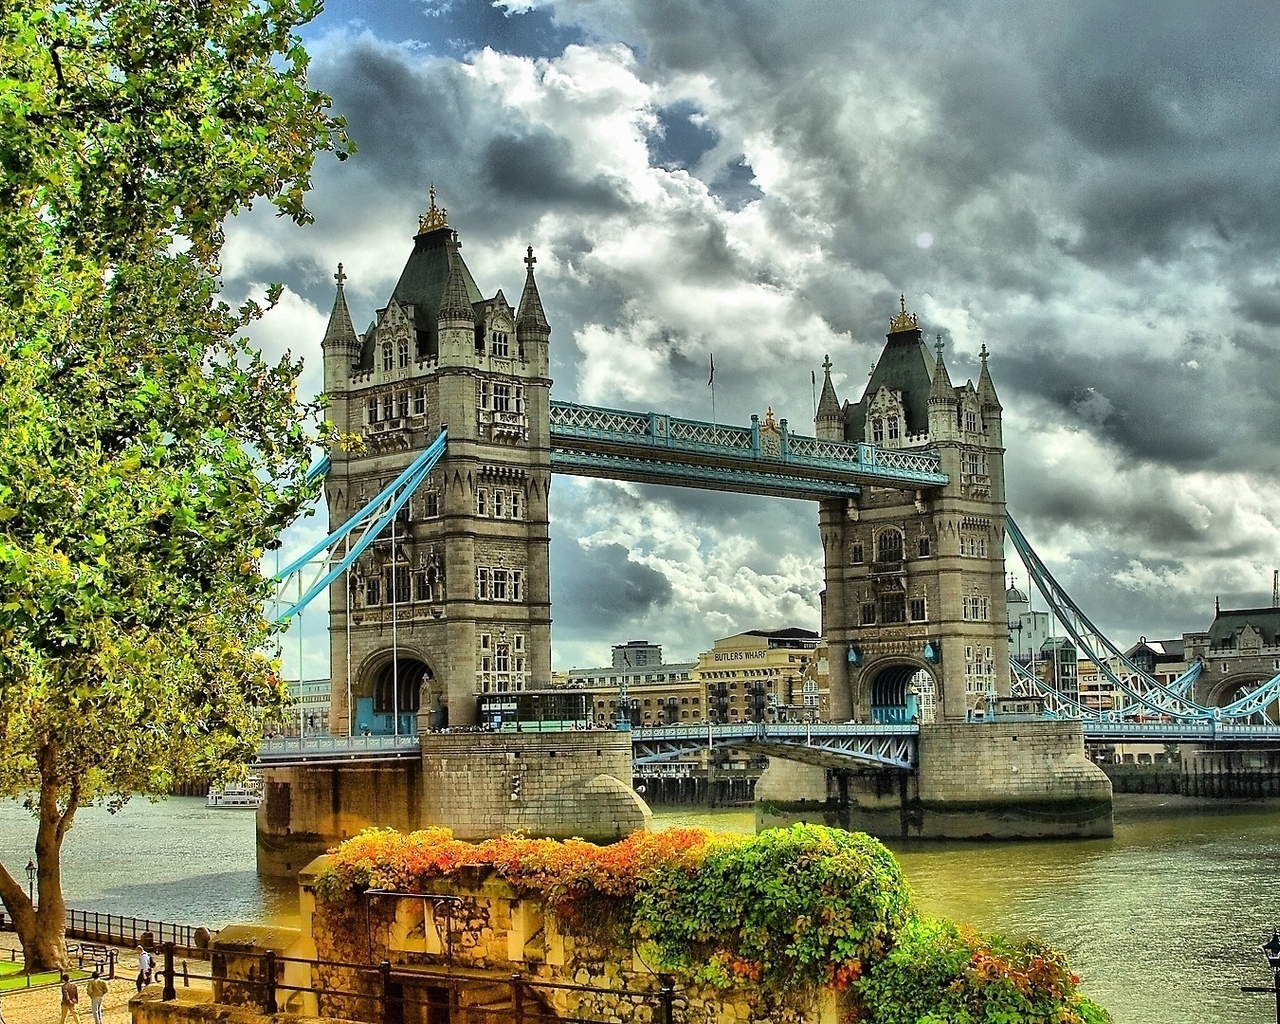 Image: London, England, Tower, Tower bridge, river Thames, trees, sky, clouds